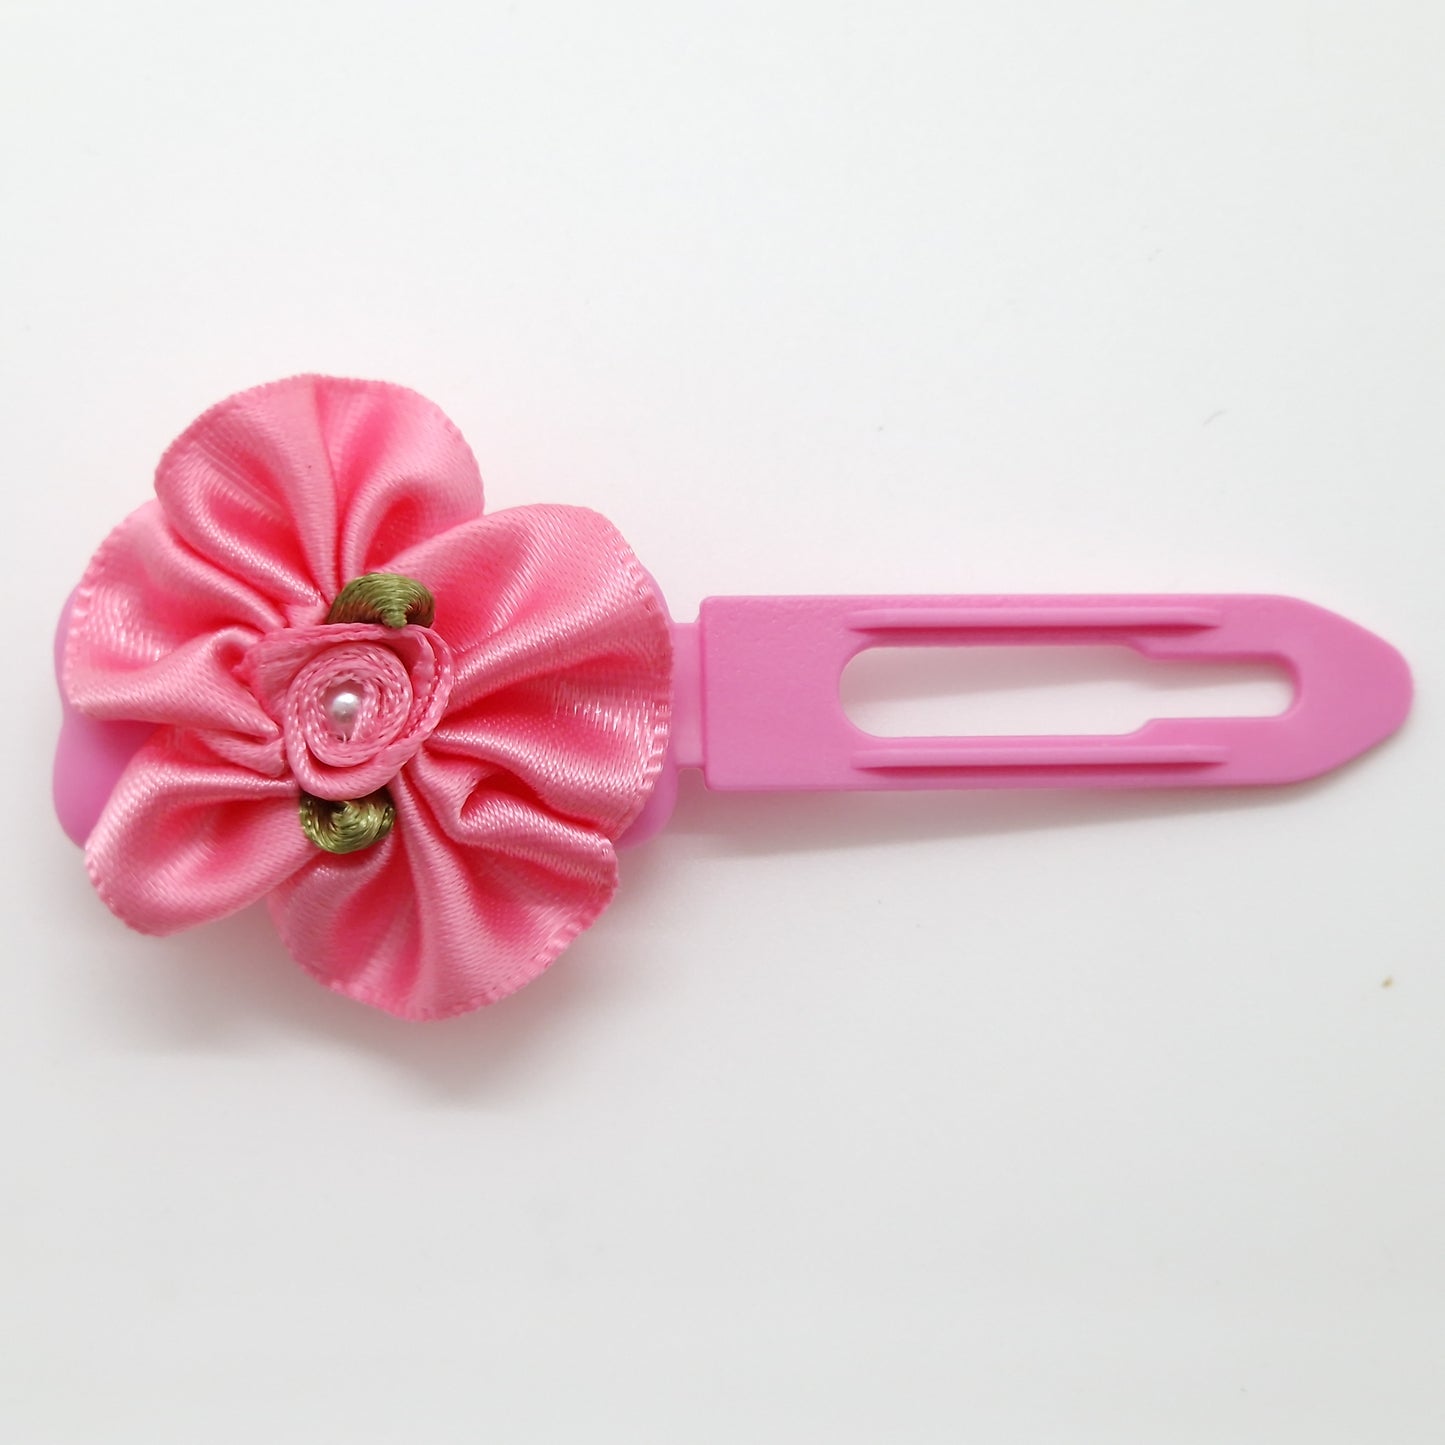 Soft Ribbon Roses With Pearl Center on 3.5cm Clip